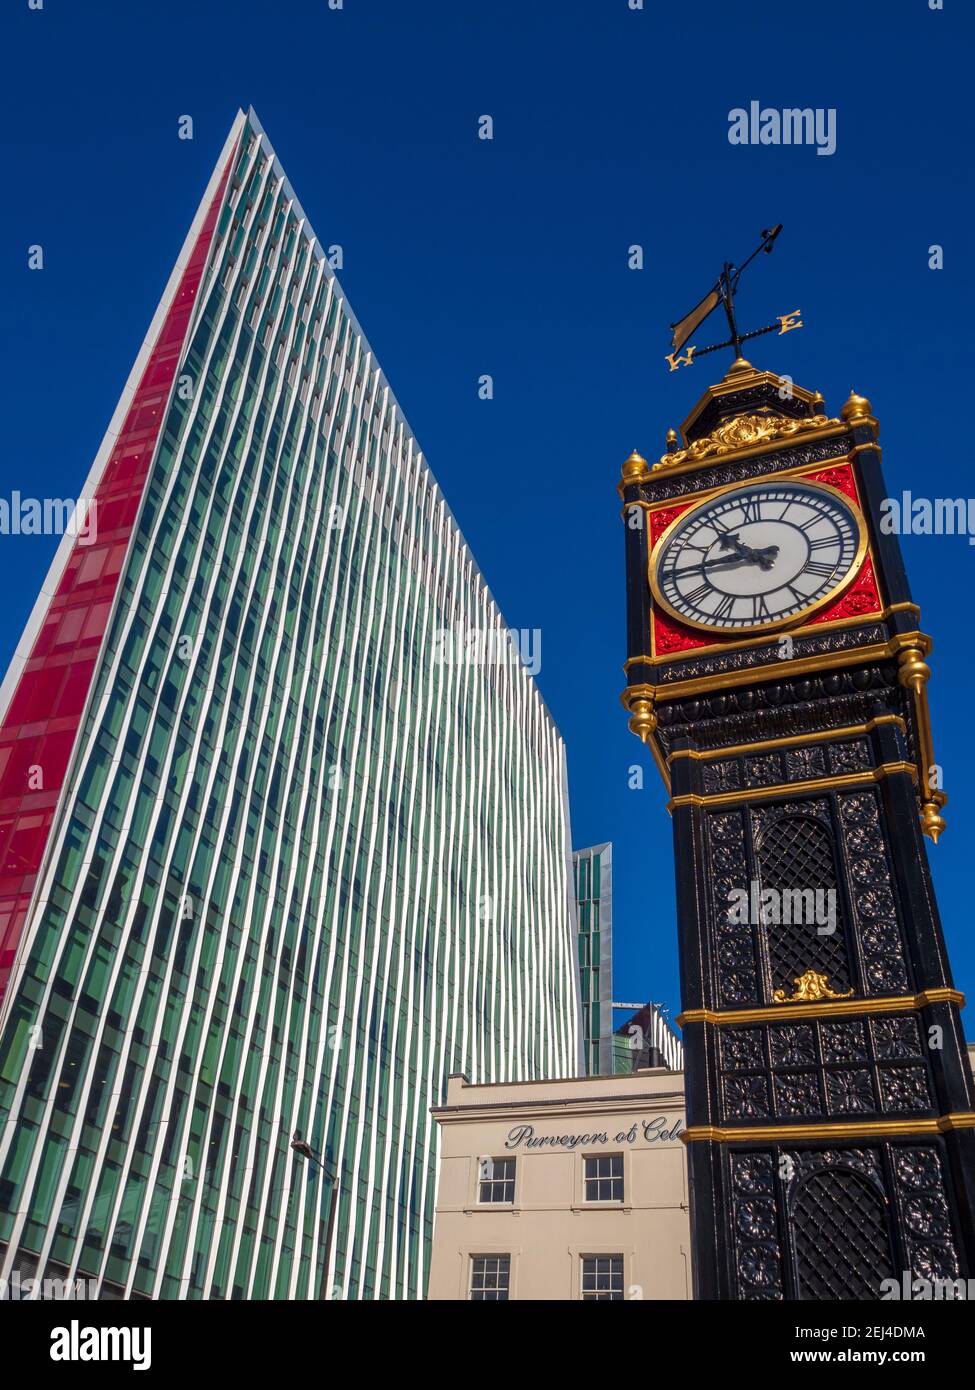 Nova Victoria Building & Little Ben Clock nr Victoria Station London. Architects PLP Architecture. Opened 2017. Nova winner of the 2017 Carbuncle Cup. Stock Photo